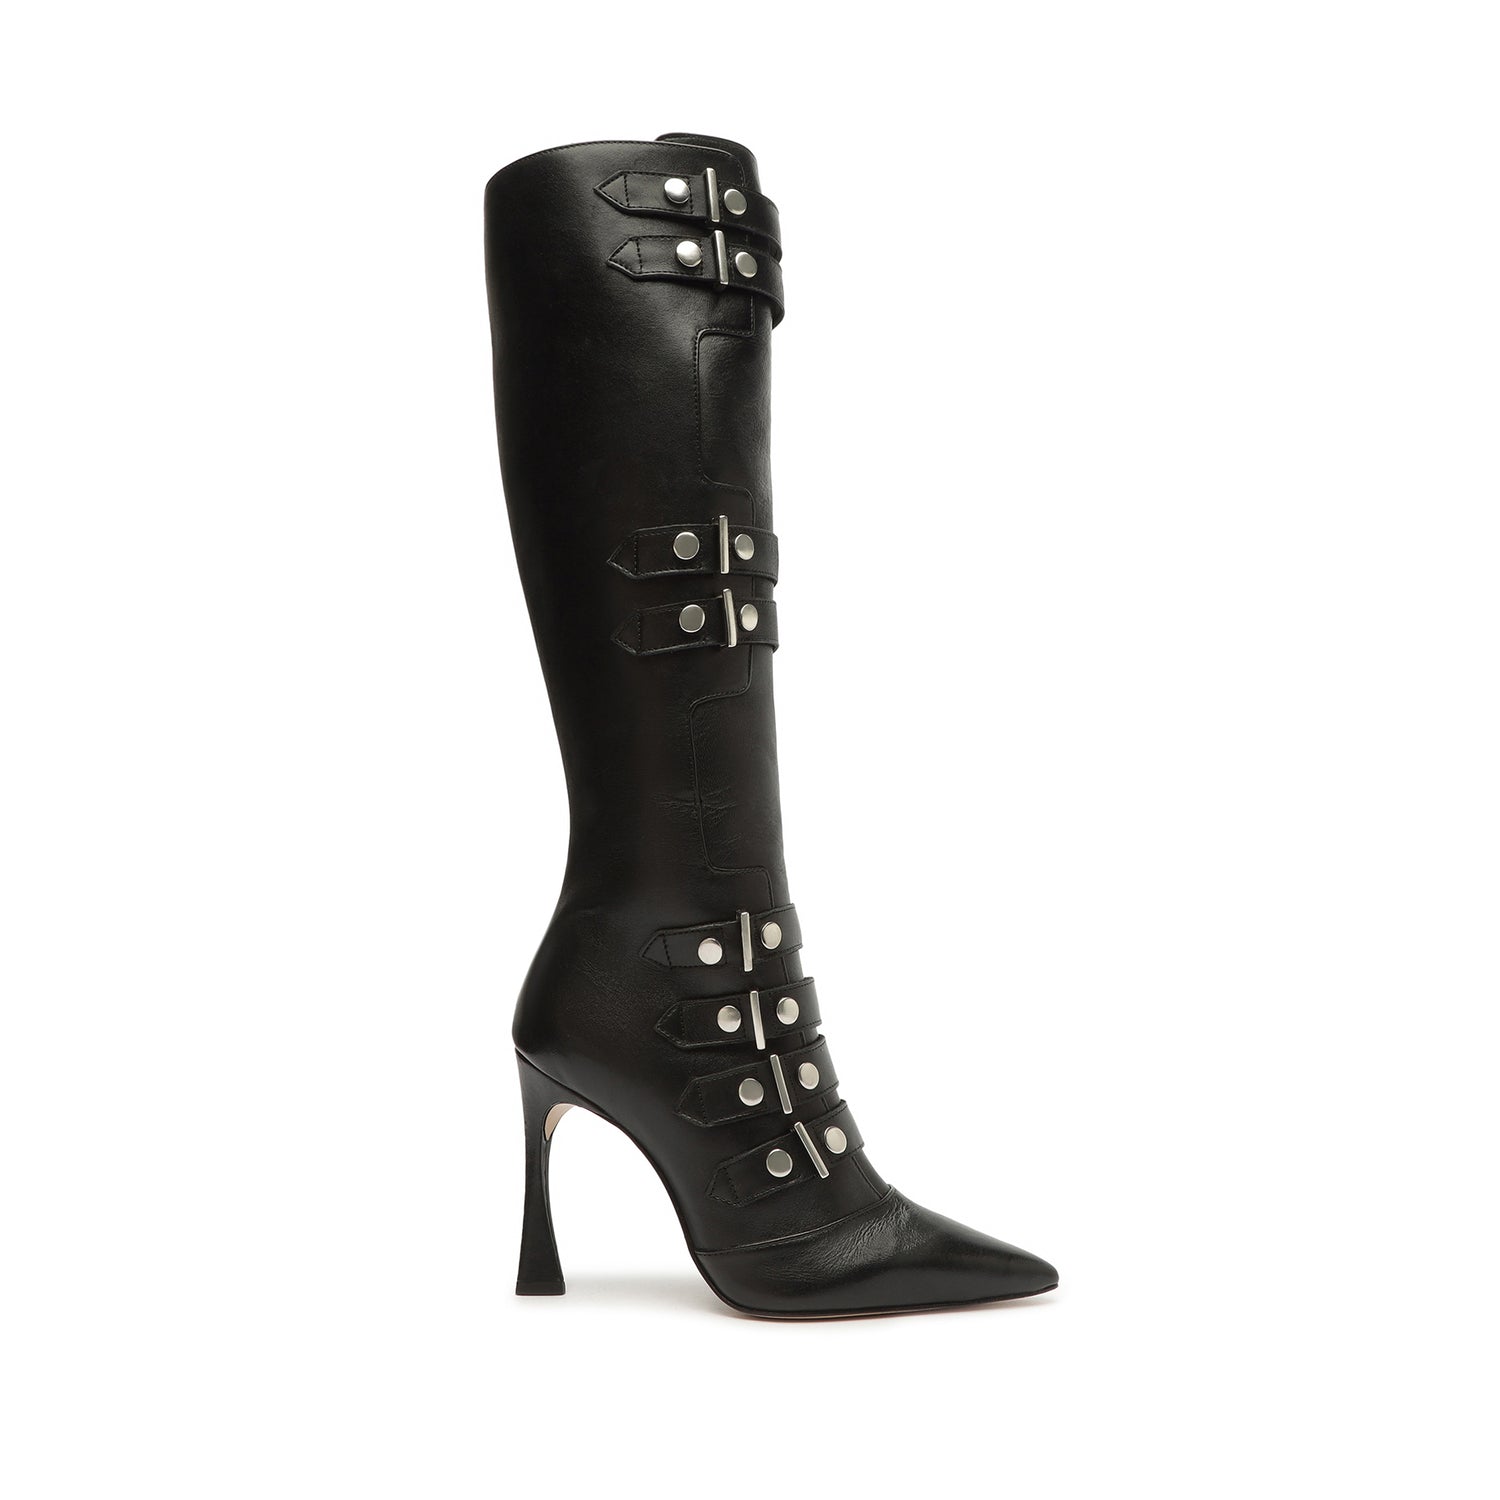 Tash Leather Boot Boots Open Stock 5 Black Leather - Schutz Shoes